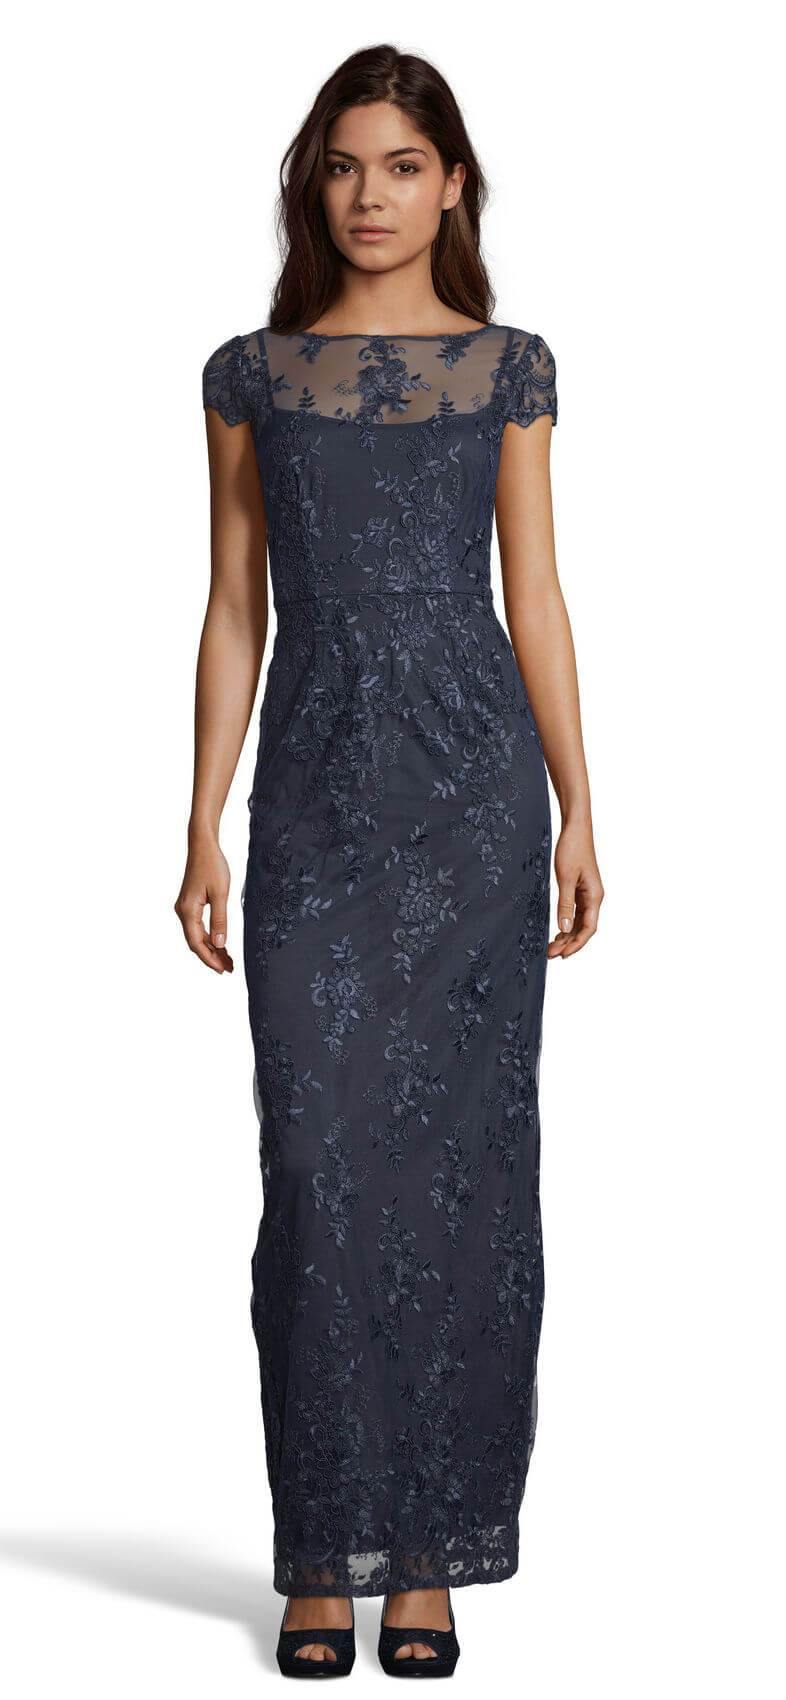 Adrianna Papell Long Formal Floral Evening Dress - The Dress Outlet Adrianna Papell